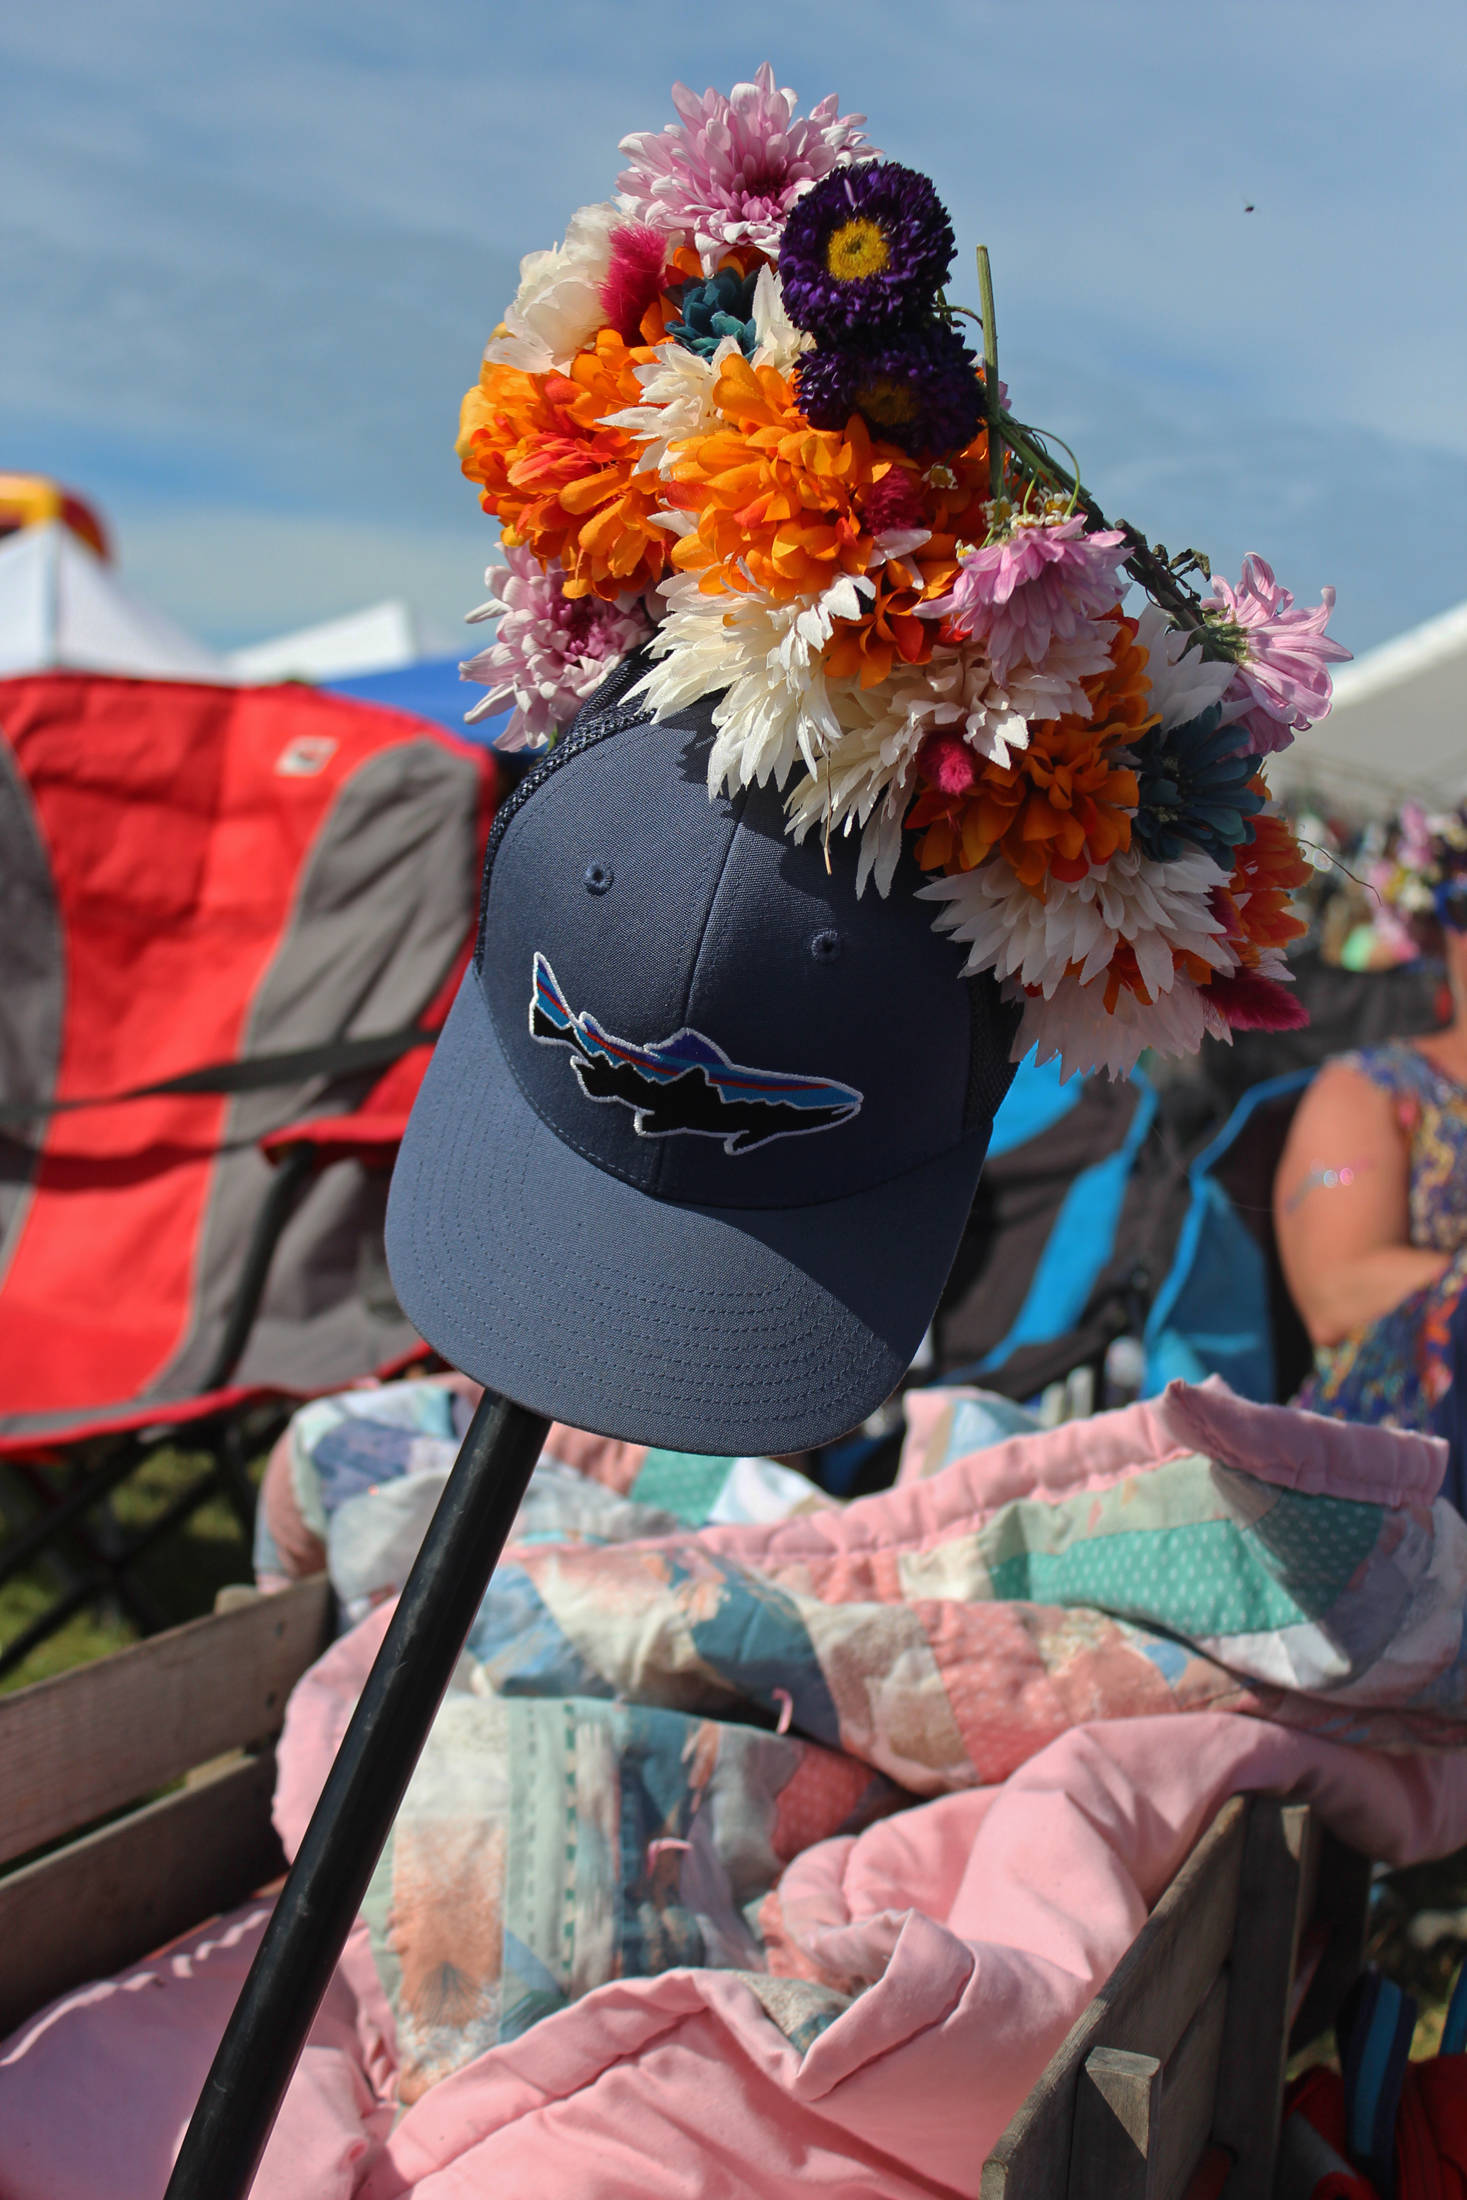 A hat decorated with peonies and other flowers sticks up out of a sea of lawn chairs, blankets, and relaxing festival goers during a performance at the Ocean Stage at this year’s Salmonfest on Saturday, Aug. 4, 2018 in Ninilchik, Alaska. (Photo by Megan Pacer/Homer News)